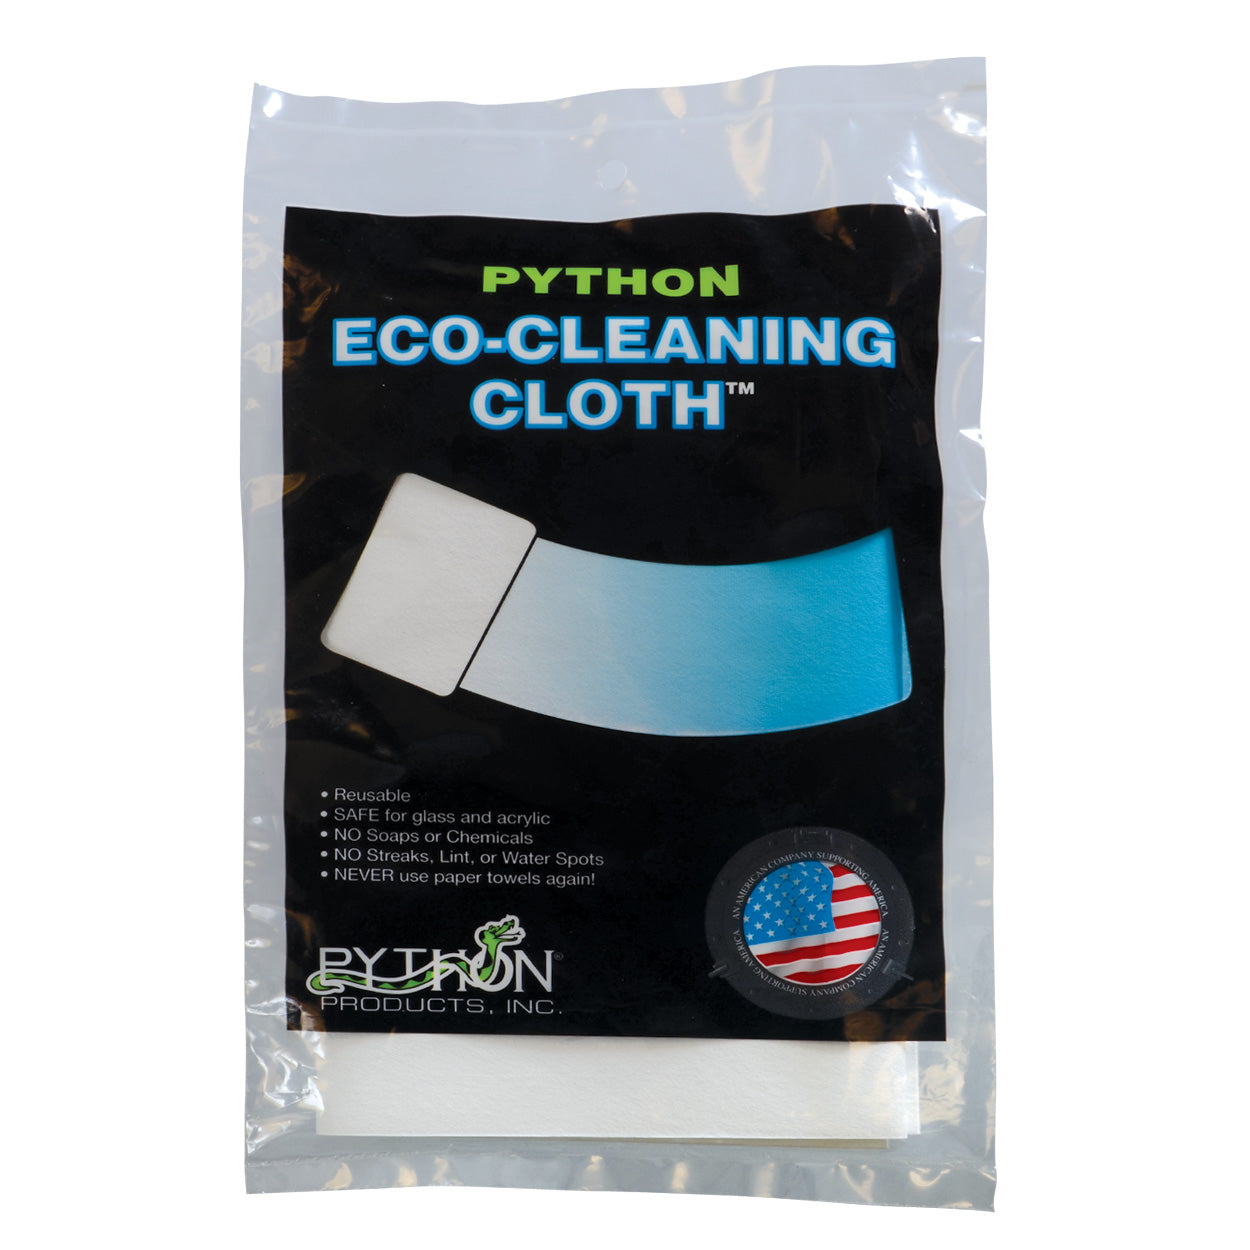 Eco-Cleaning Cloth